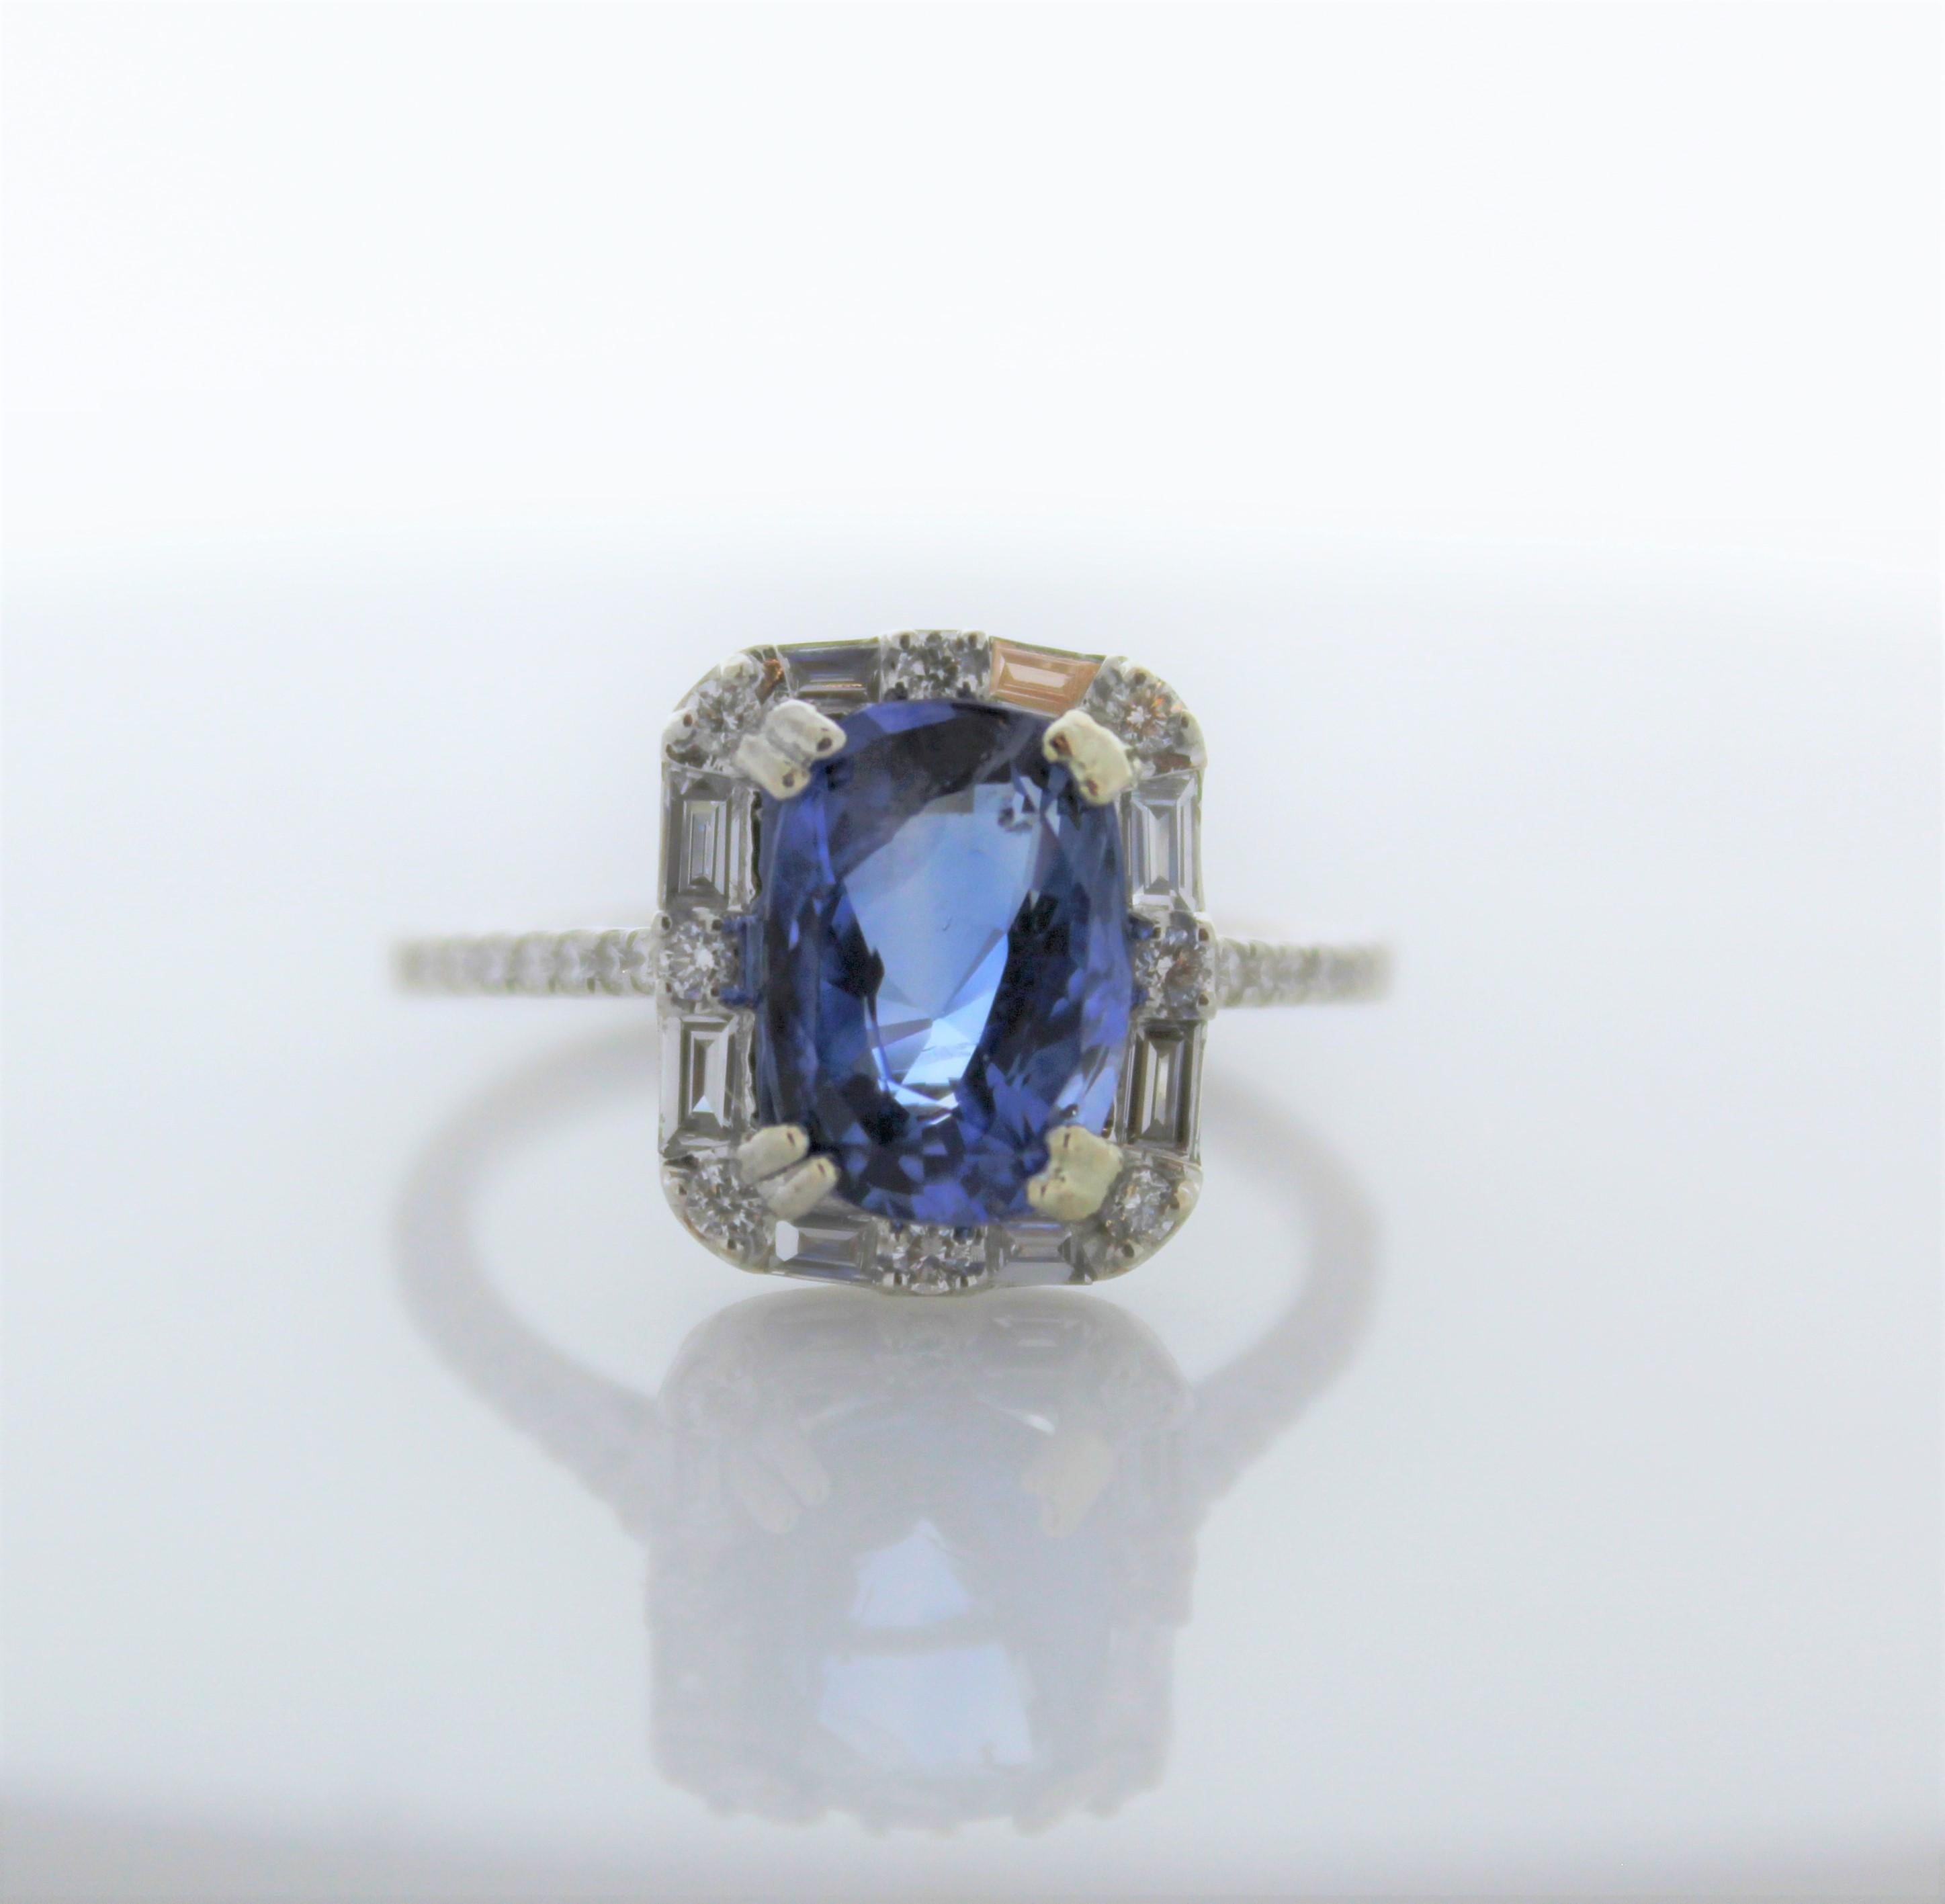 This is a 3.48 carats vibrant royal blue sapphire takes center stage on this luxurious setting. Its gem origin is Sri Lanka. It is polished and faceted to a cushion cut. Its color, transparency, and luster are excellent. A total of 34 round